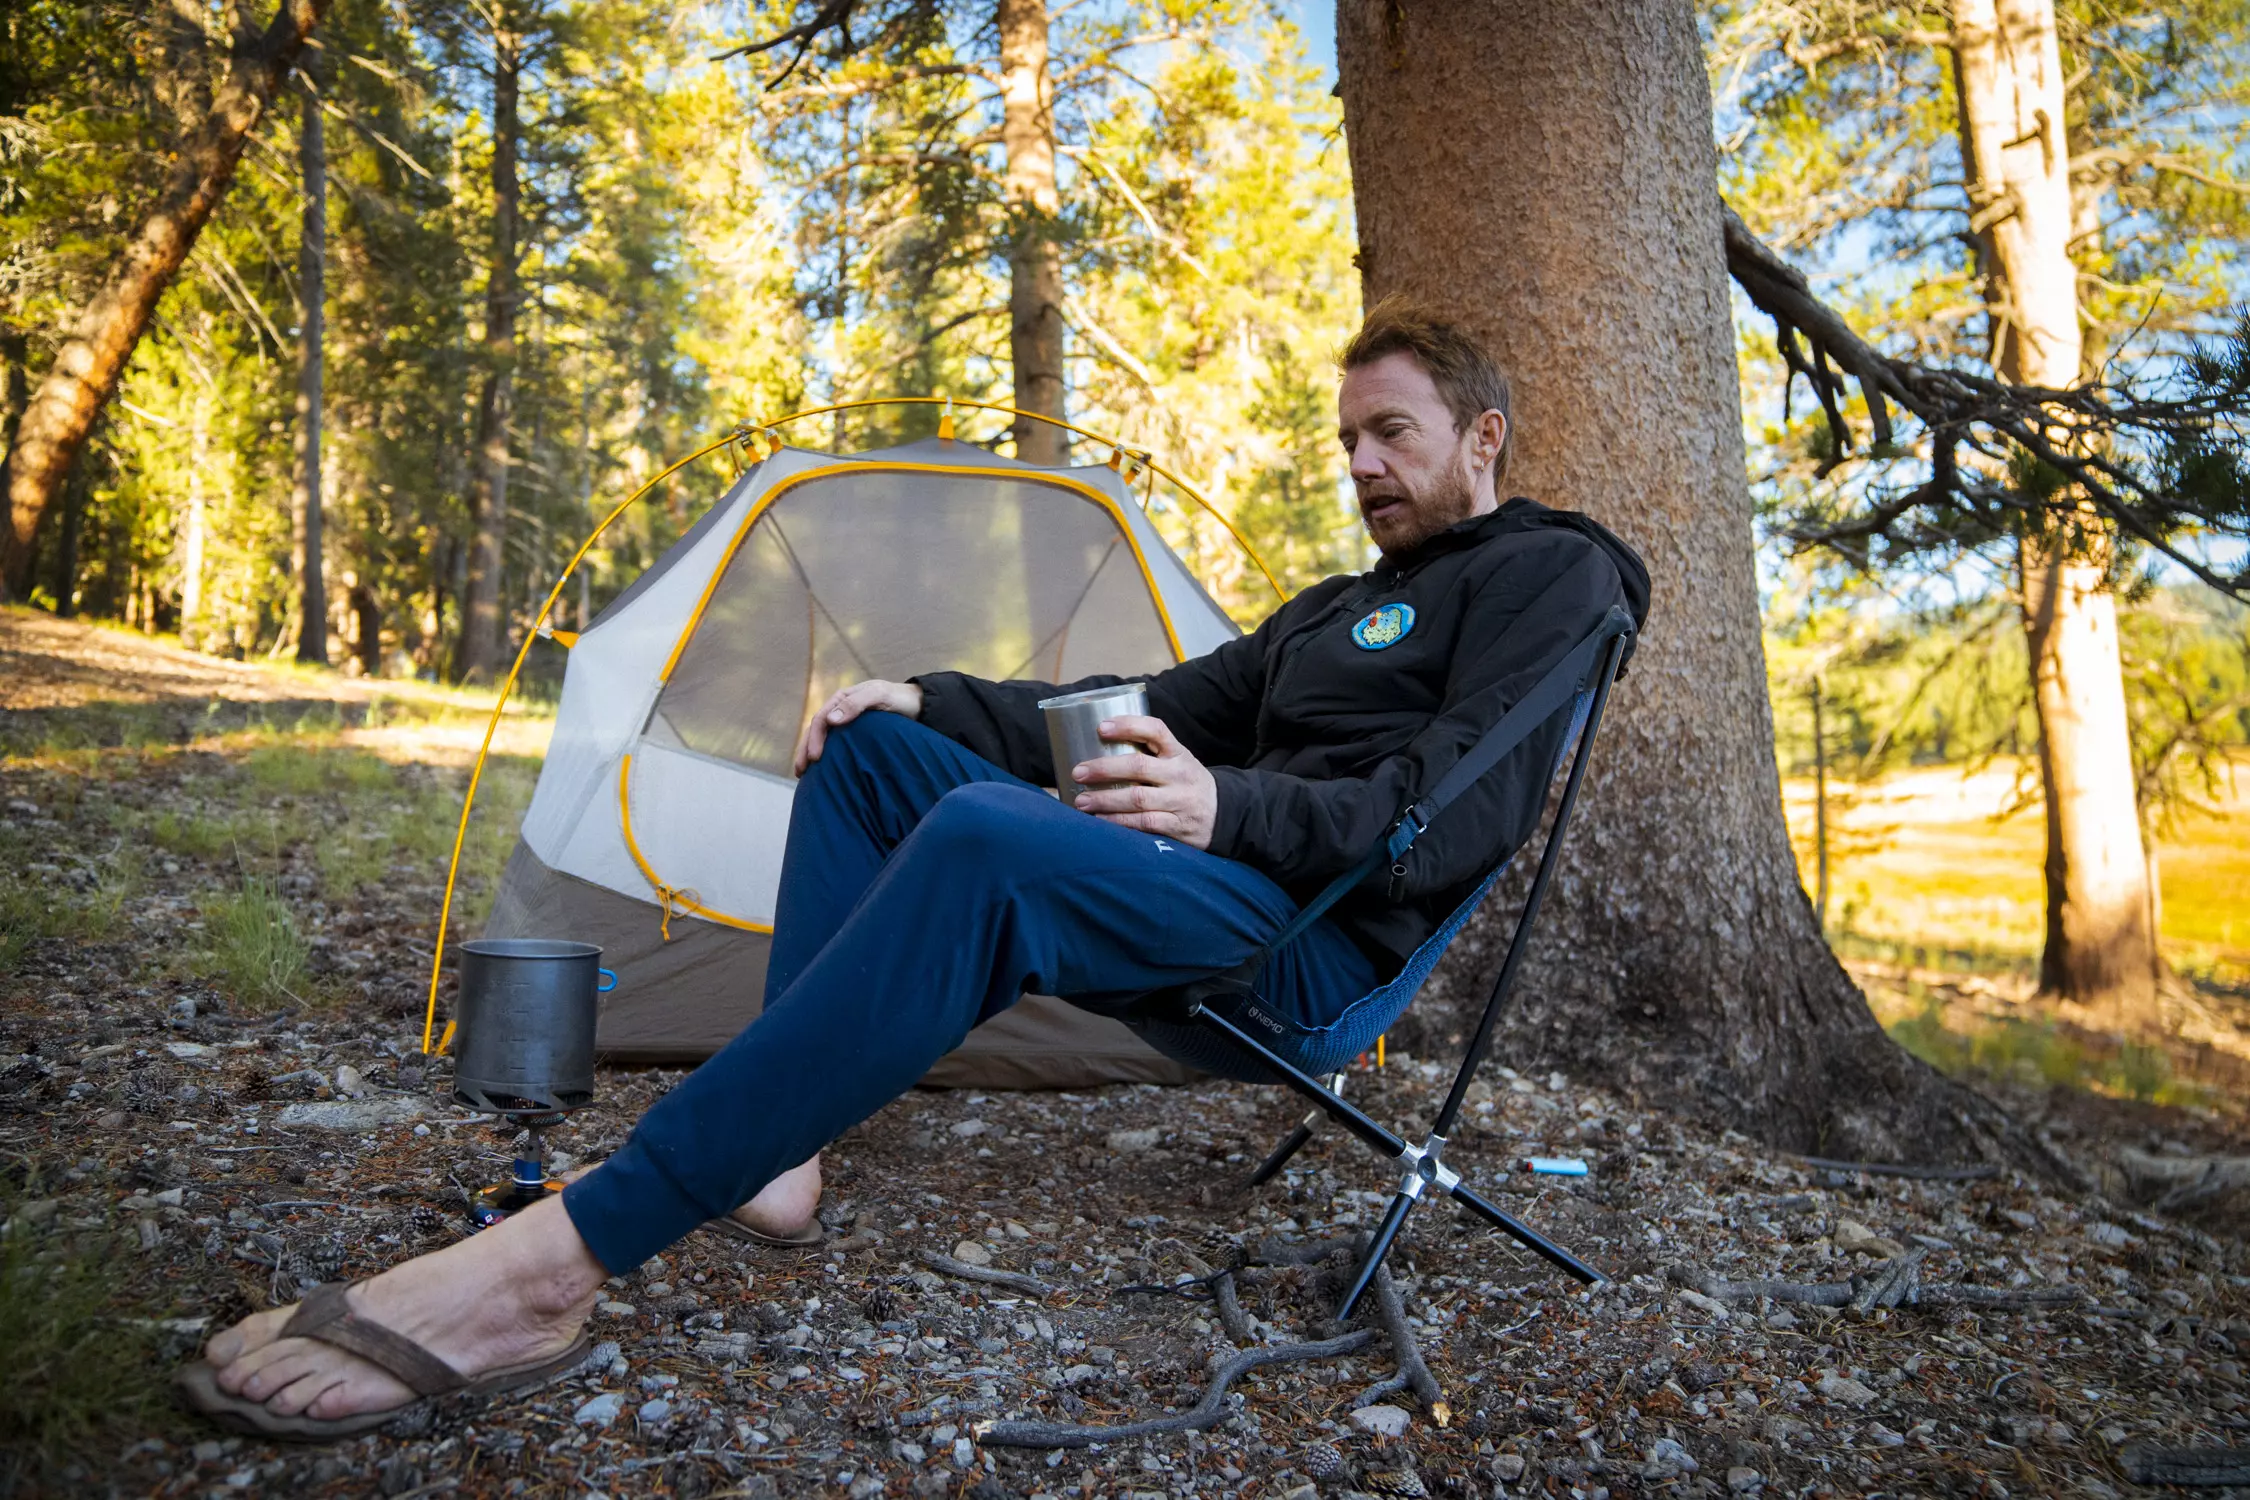 The Big Agnes Mica Chair boasts solid, comfortable back support